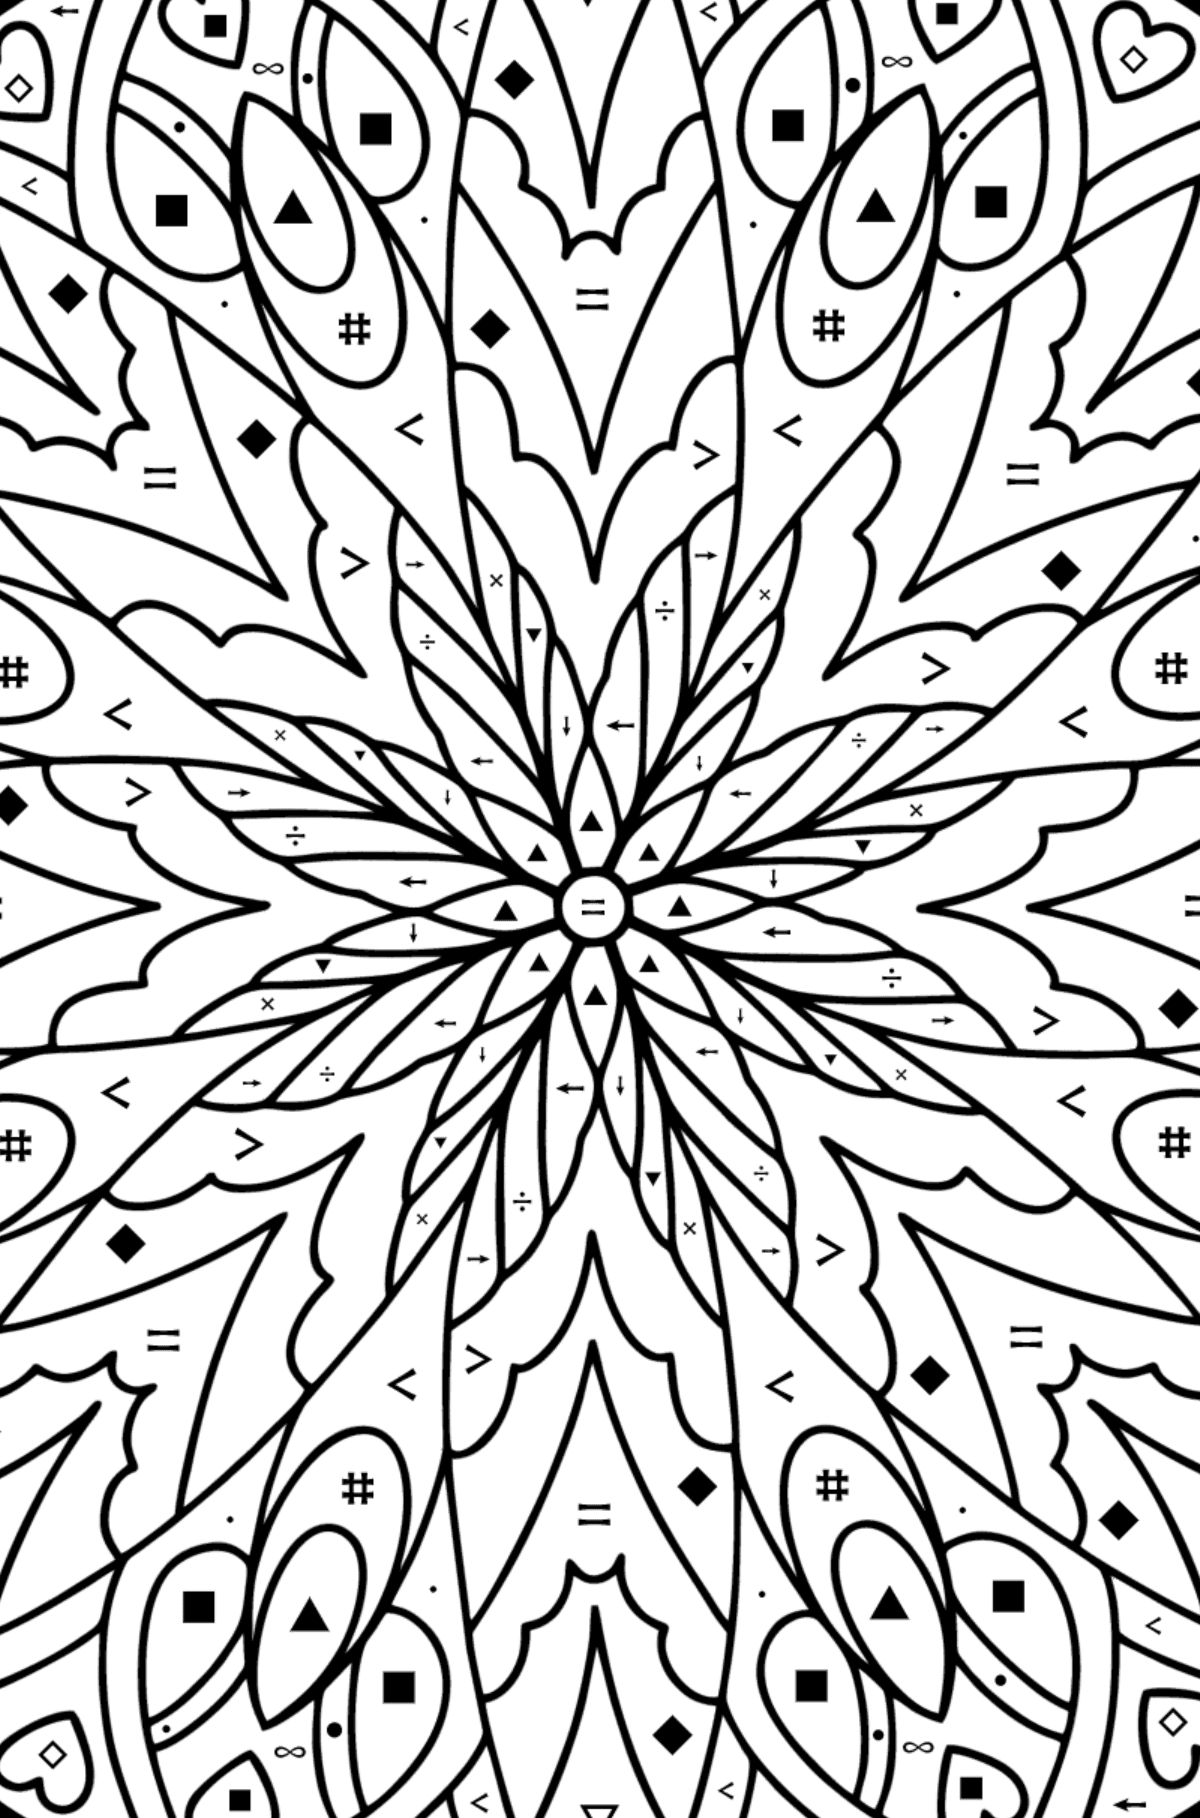 Complex Coloring Page for Kids - Mandala - Coloring by Symbols for Kids